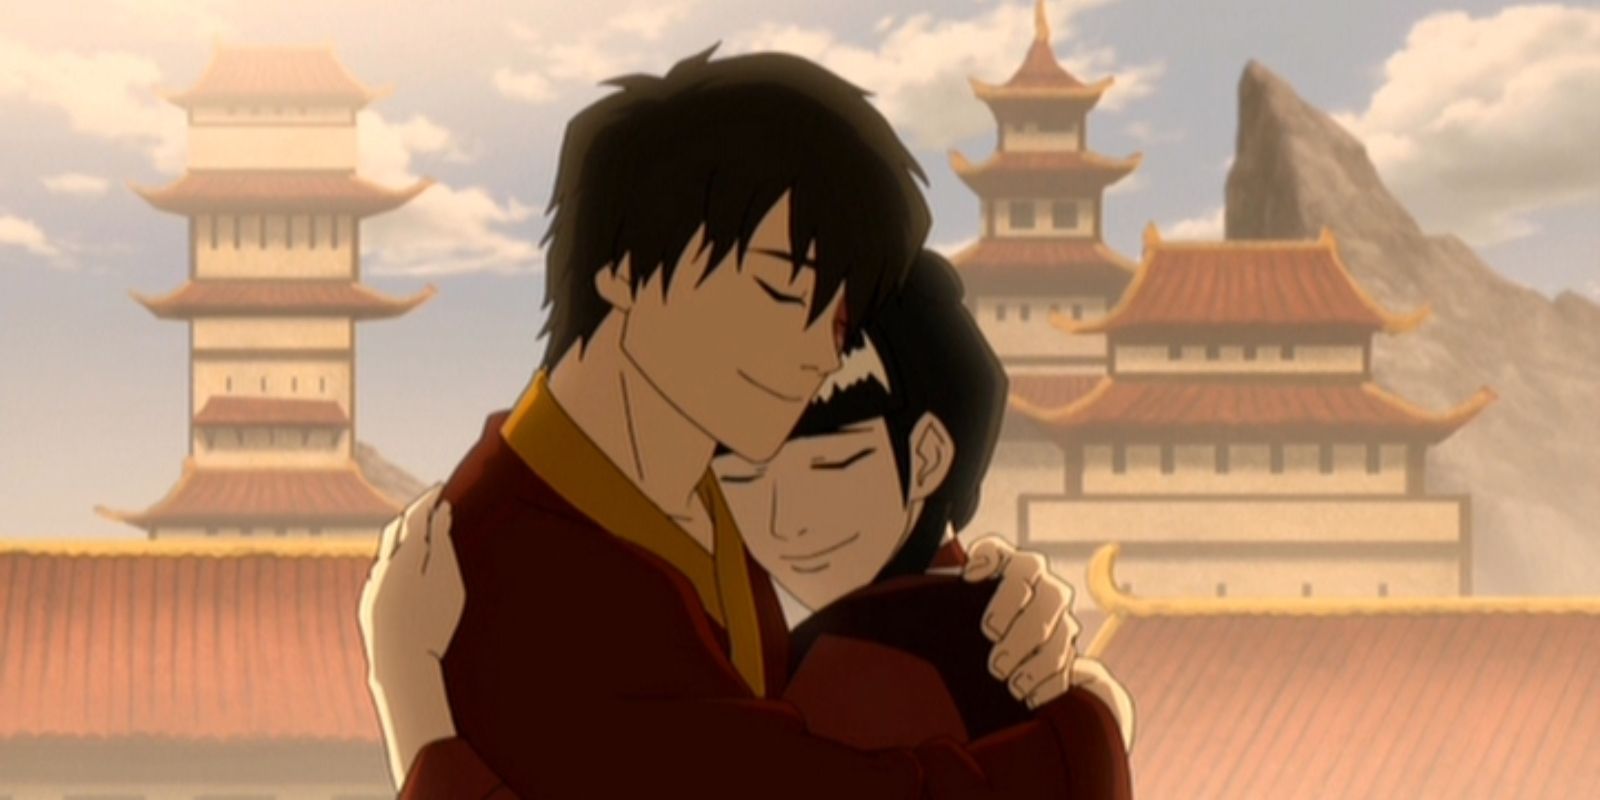 Zuko and Mai hug at the end of The Last Airbender